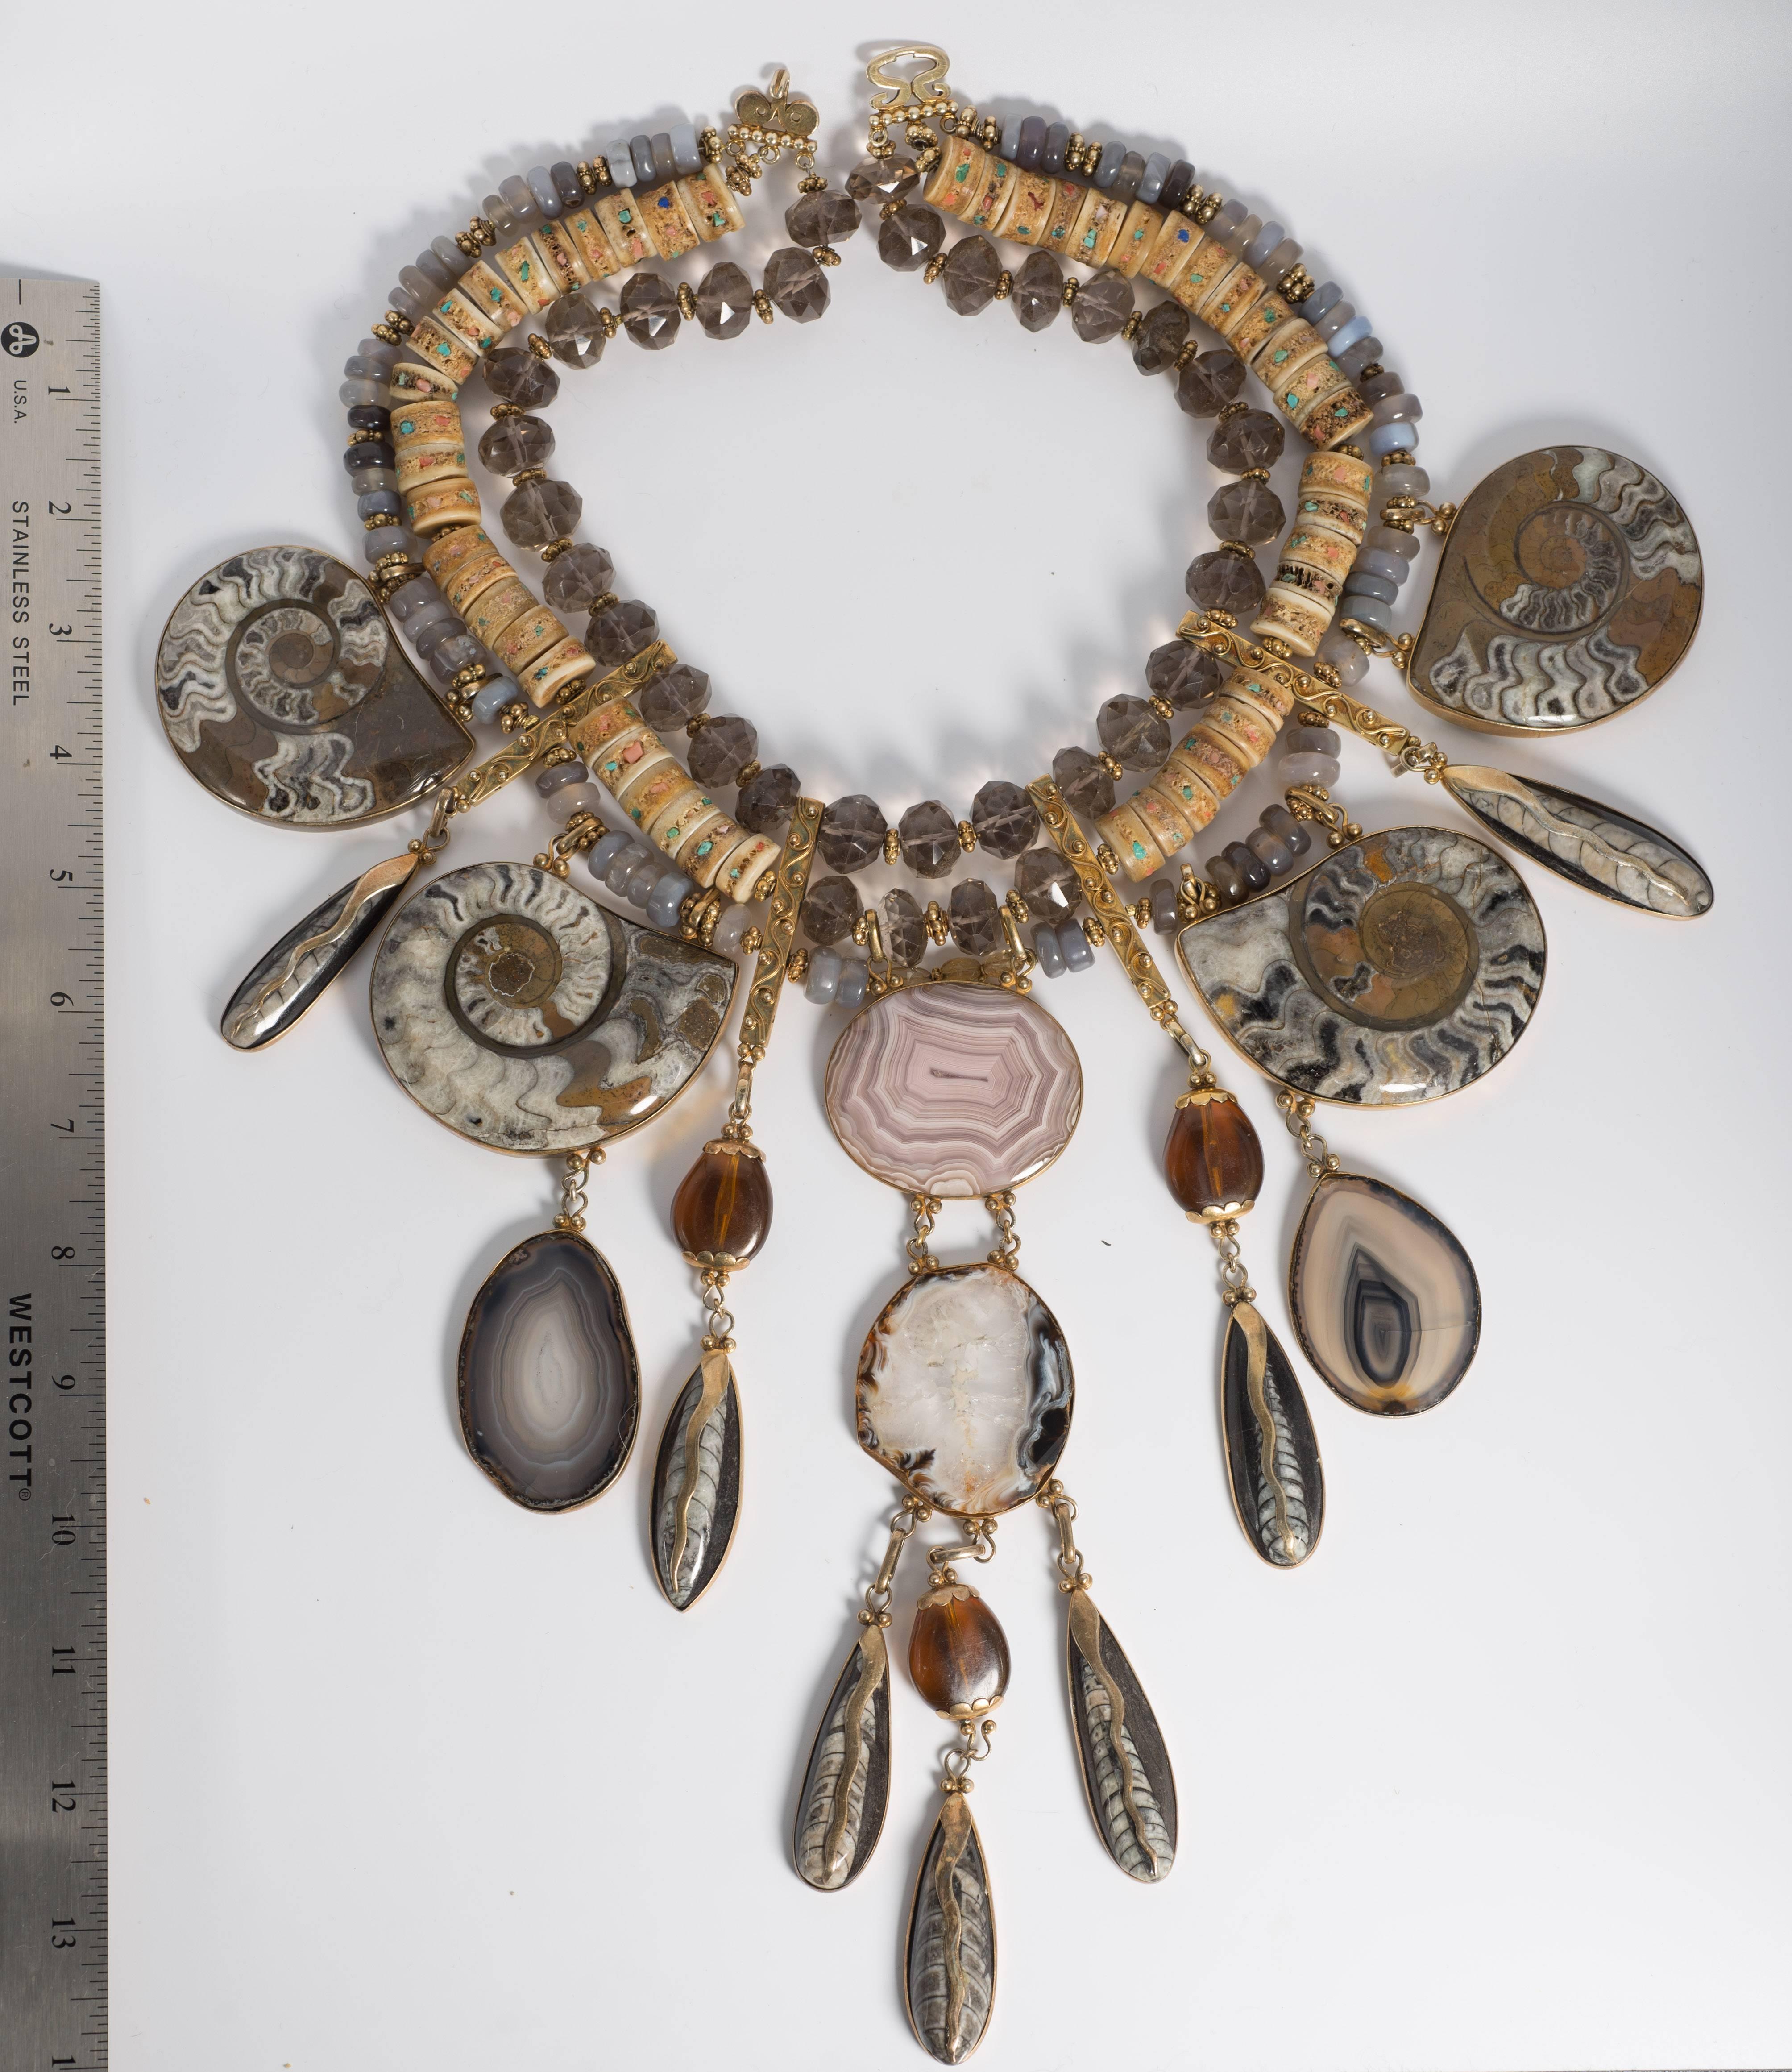 Tony Duquette Extraordinary Fossil Agate Citrine Necklace.

A Tony Duquette one of a kind masterpiece collar set with fossil agates of matching shades, amber, fossil pendants and strung with faceted smoky citrines, agate rondels and flecked stone